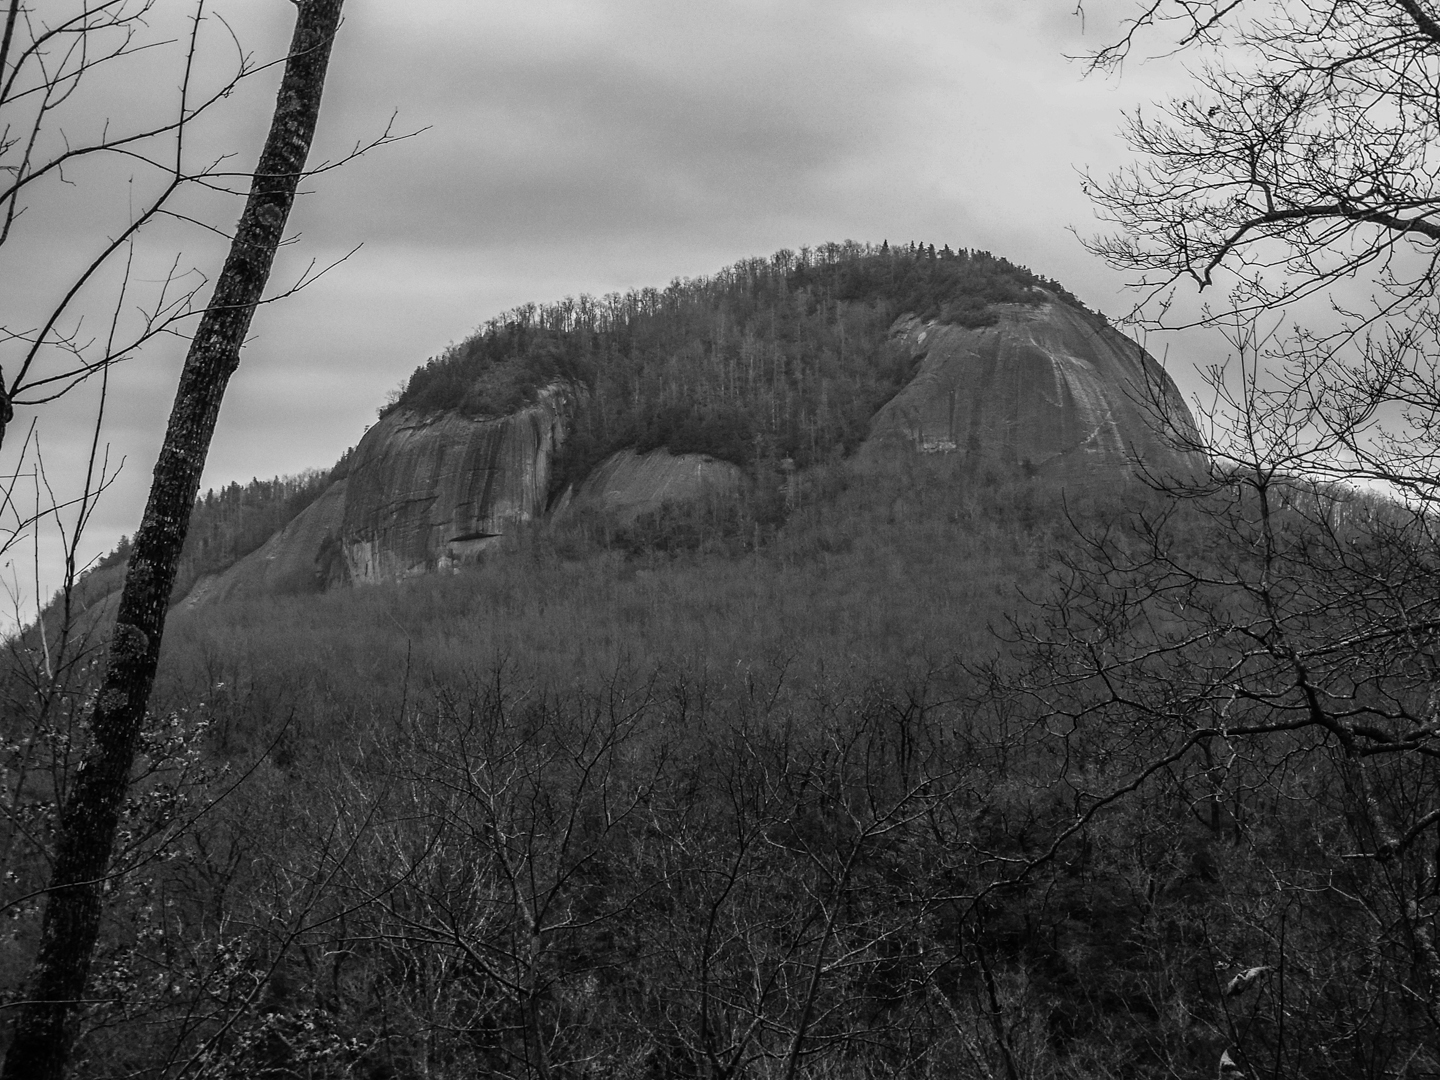 Looking Glass Rock - Pisgah National Forest